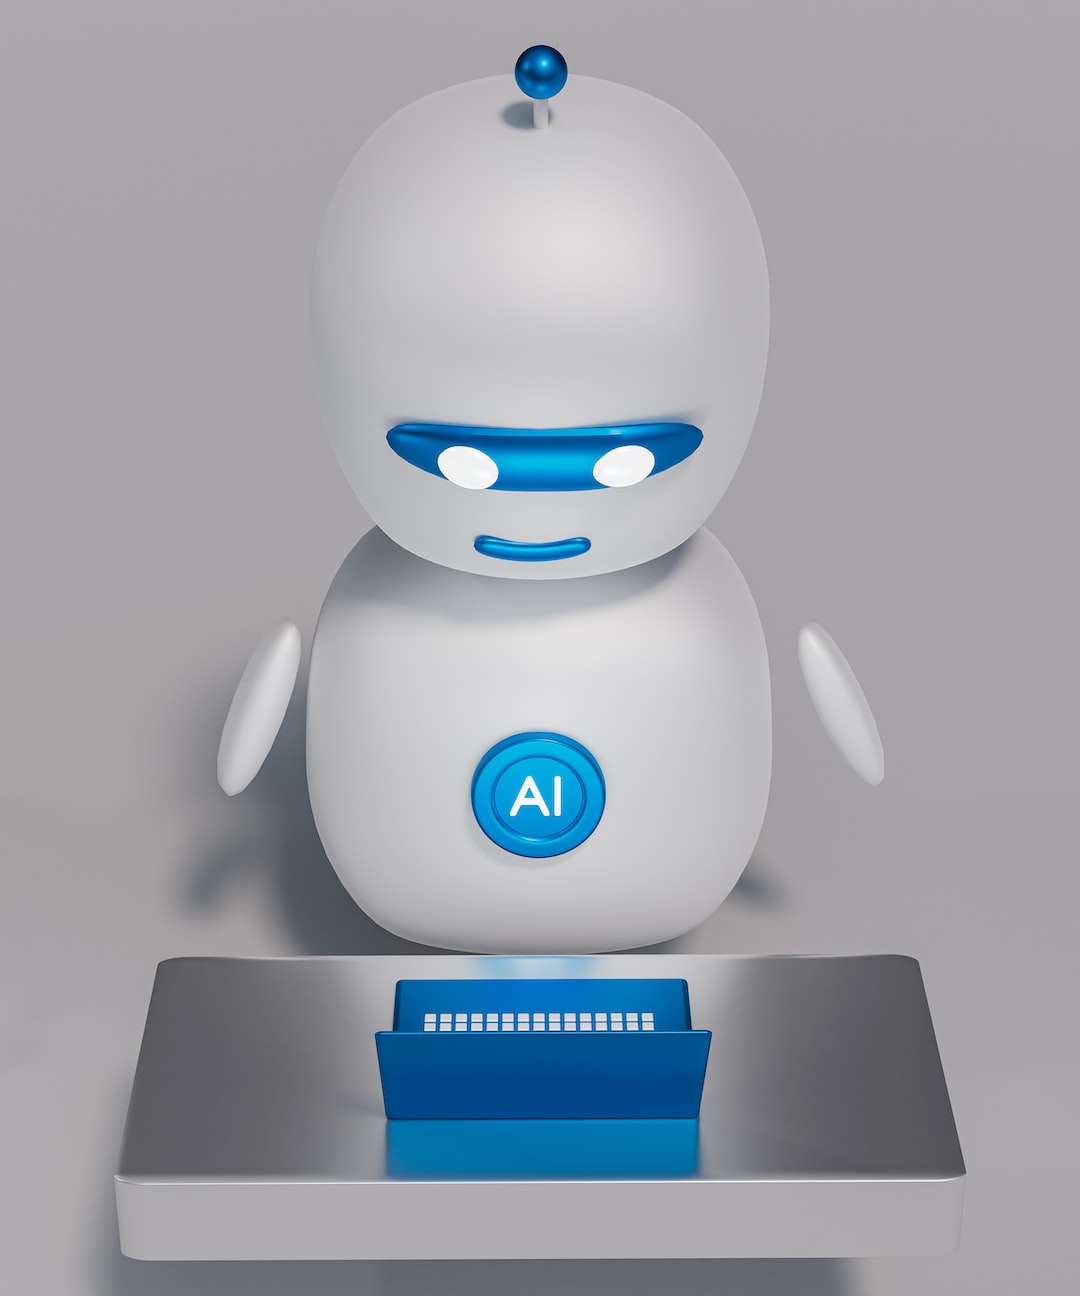 3D illustration of a friendly-looking robot with an 'AI' badge, standing behind a desk with a laptop.